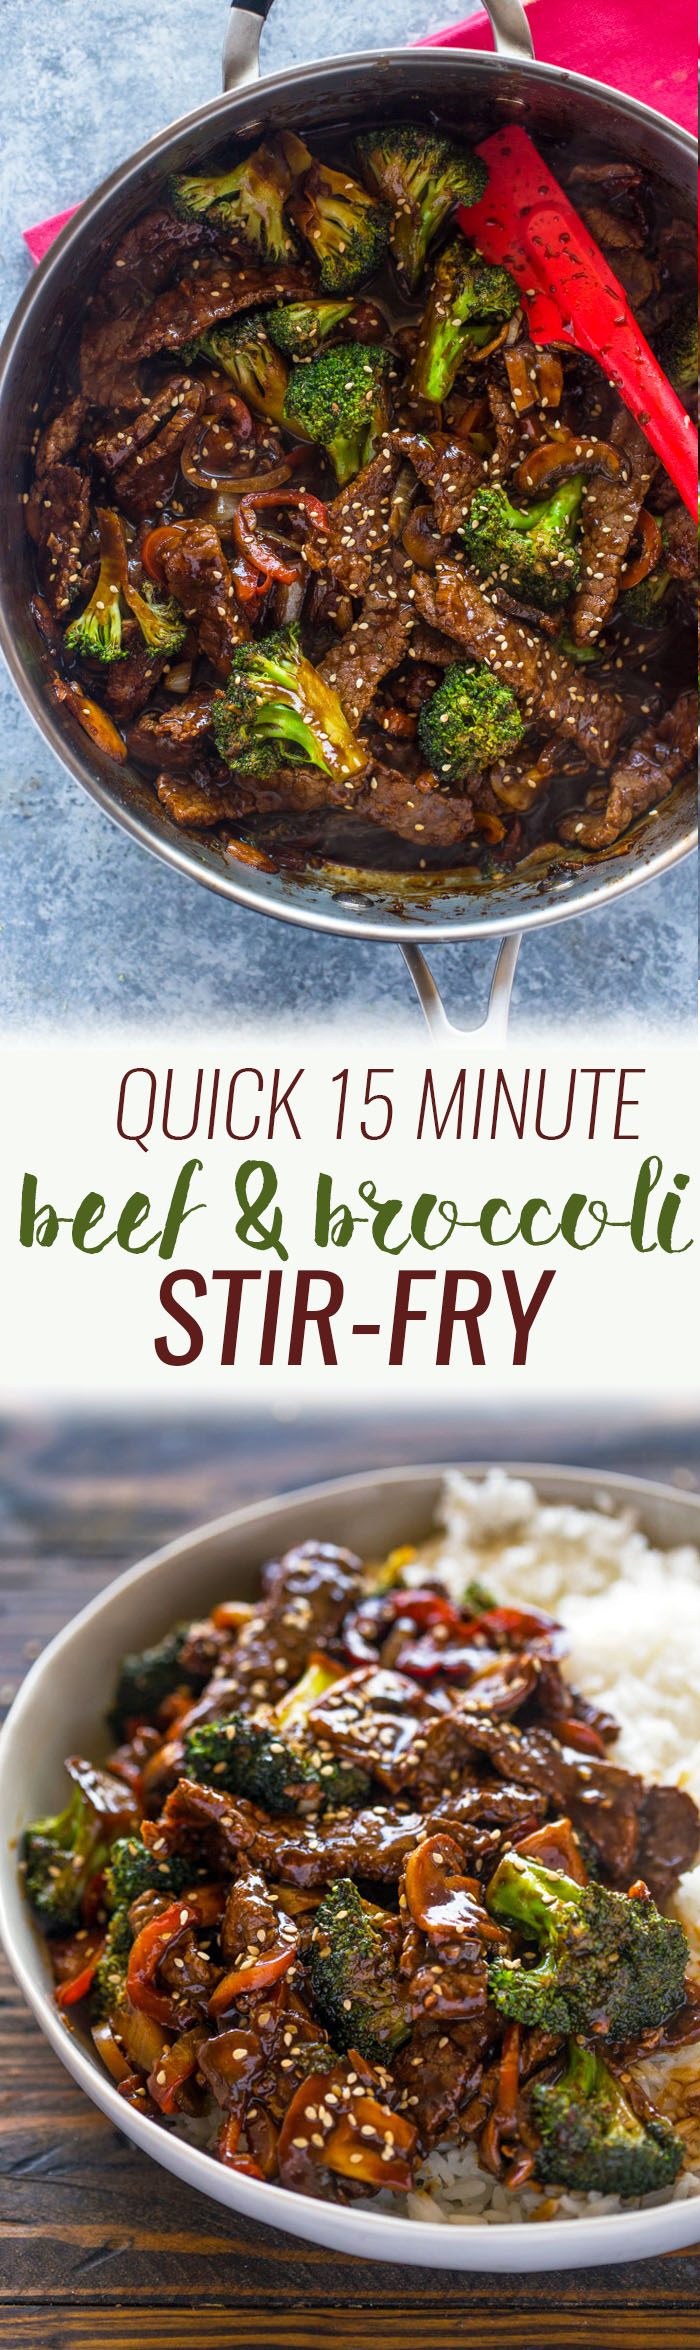 Quick 15 Minute Beef and Broccoli Stir-Fry